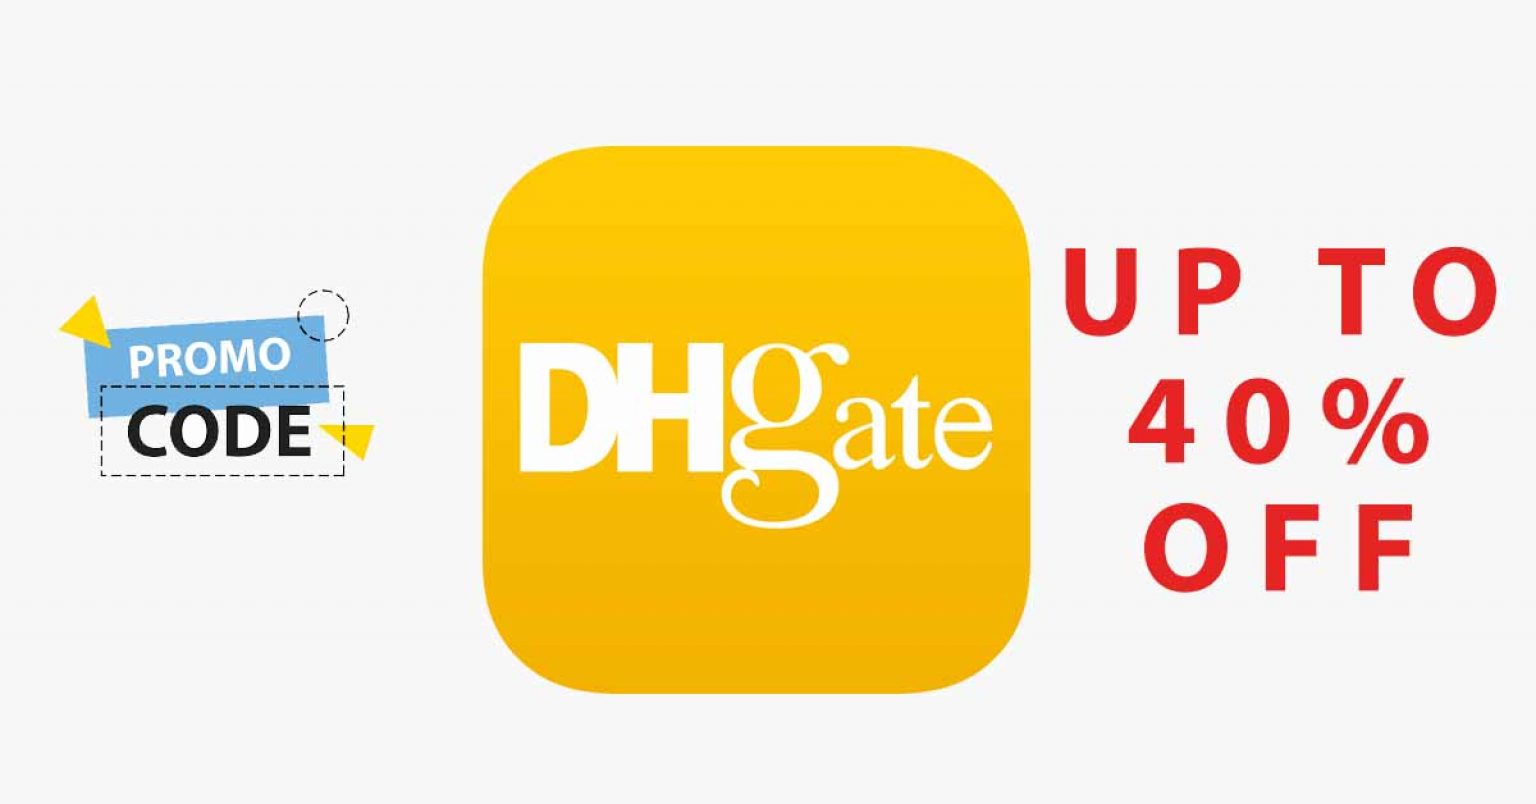 DHgate website in Bahrain provide the latest coupons